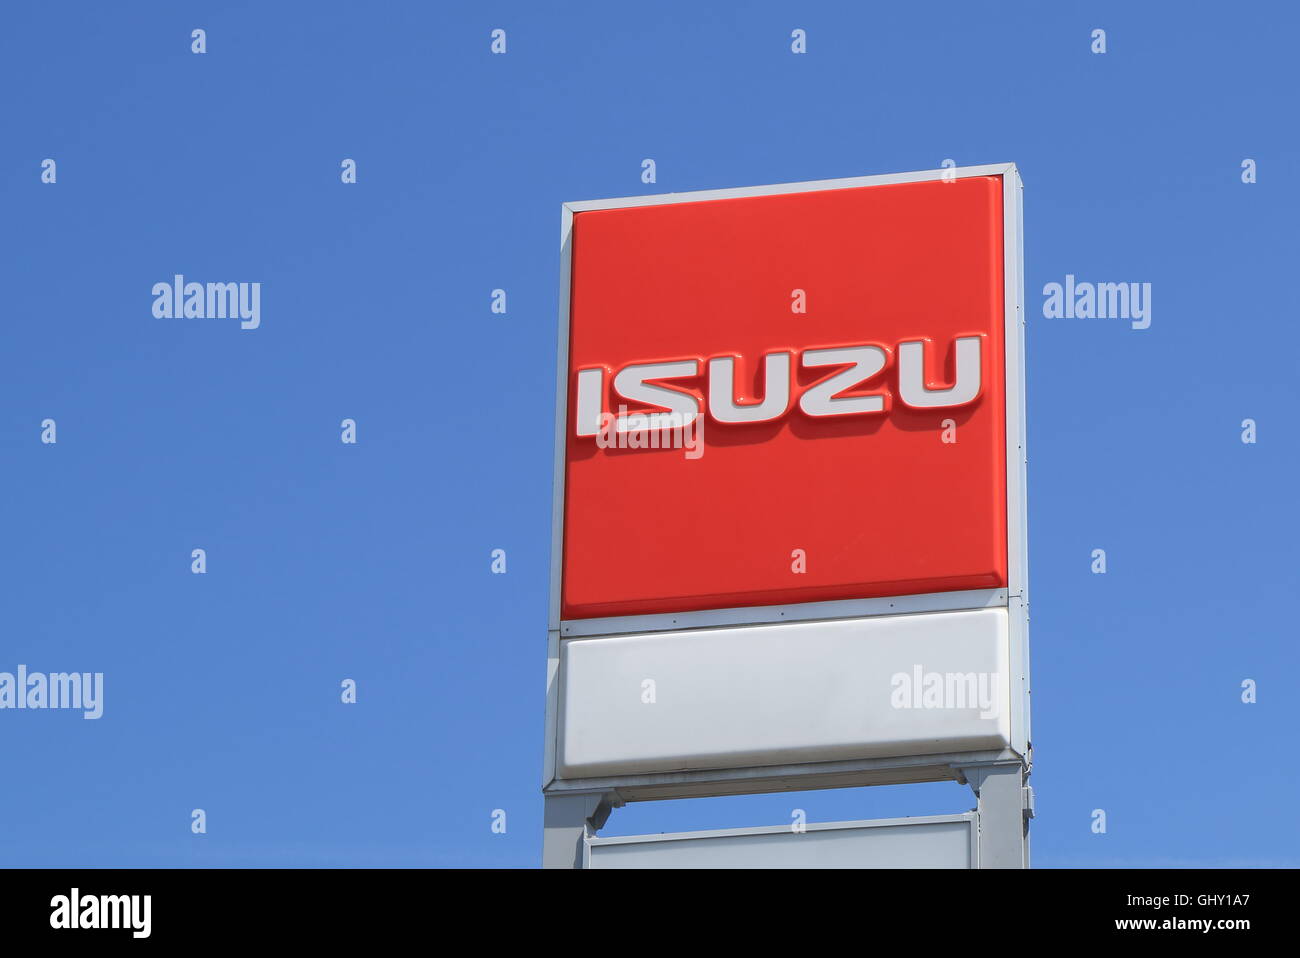 ISUZU Japanese car manufacturer, Japanese comercial vehicle and diesel engine manufacturer founded in 1916. Stock Photo